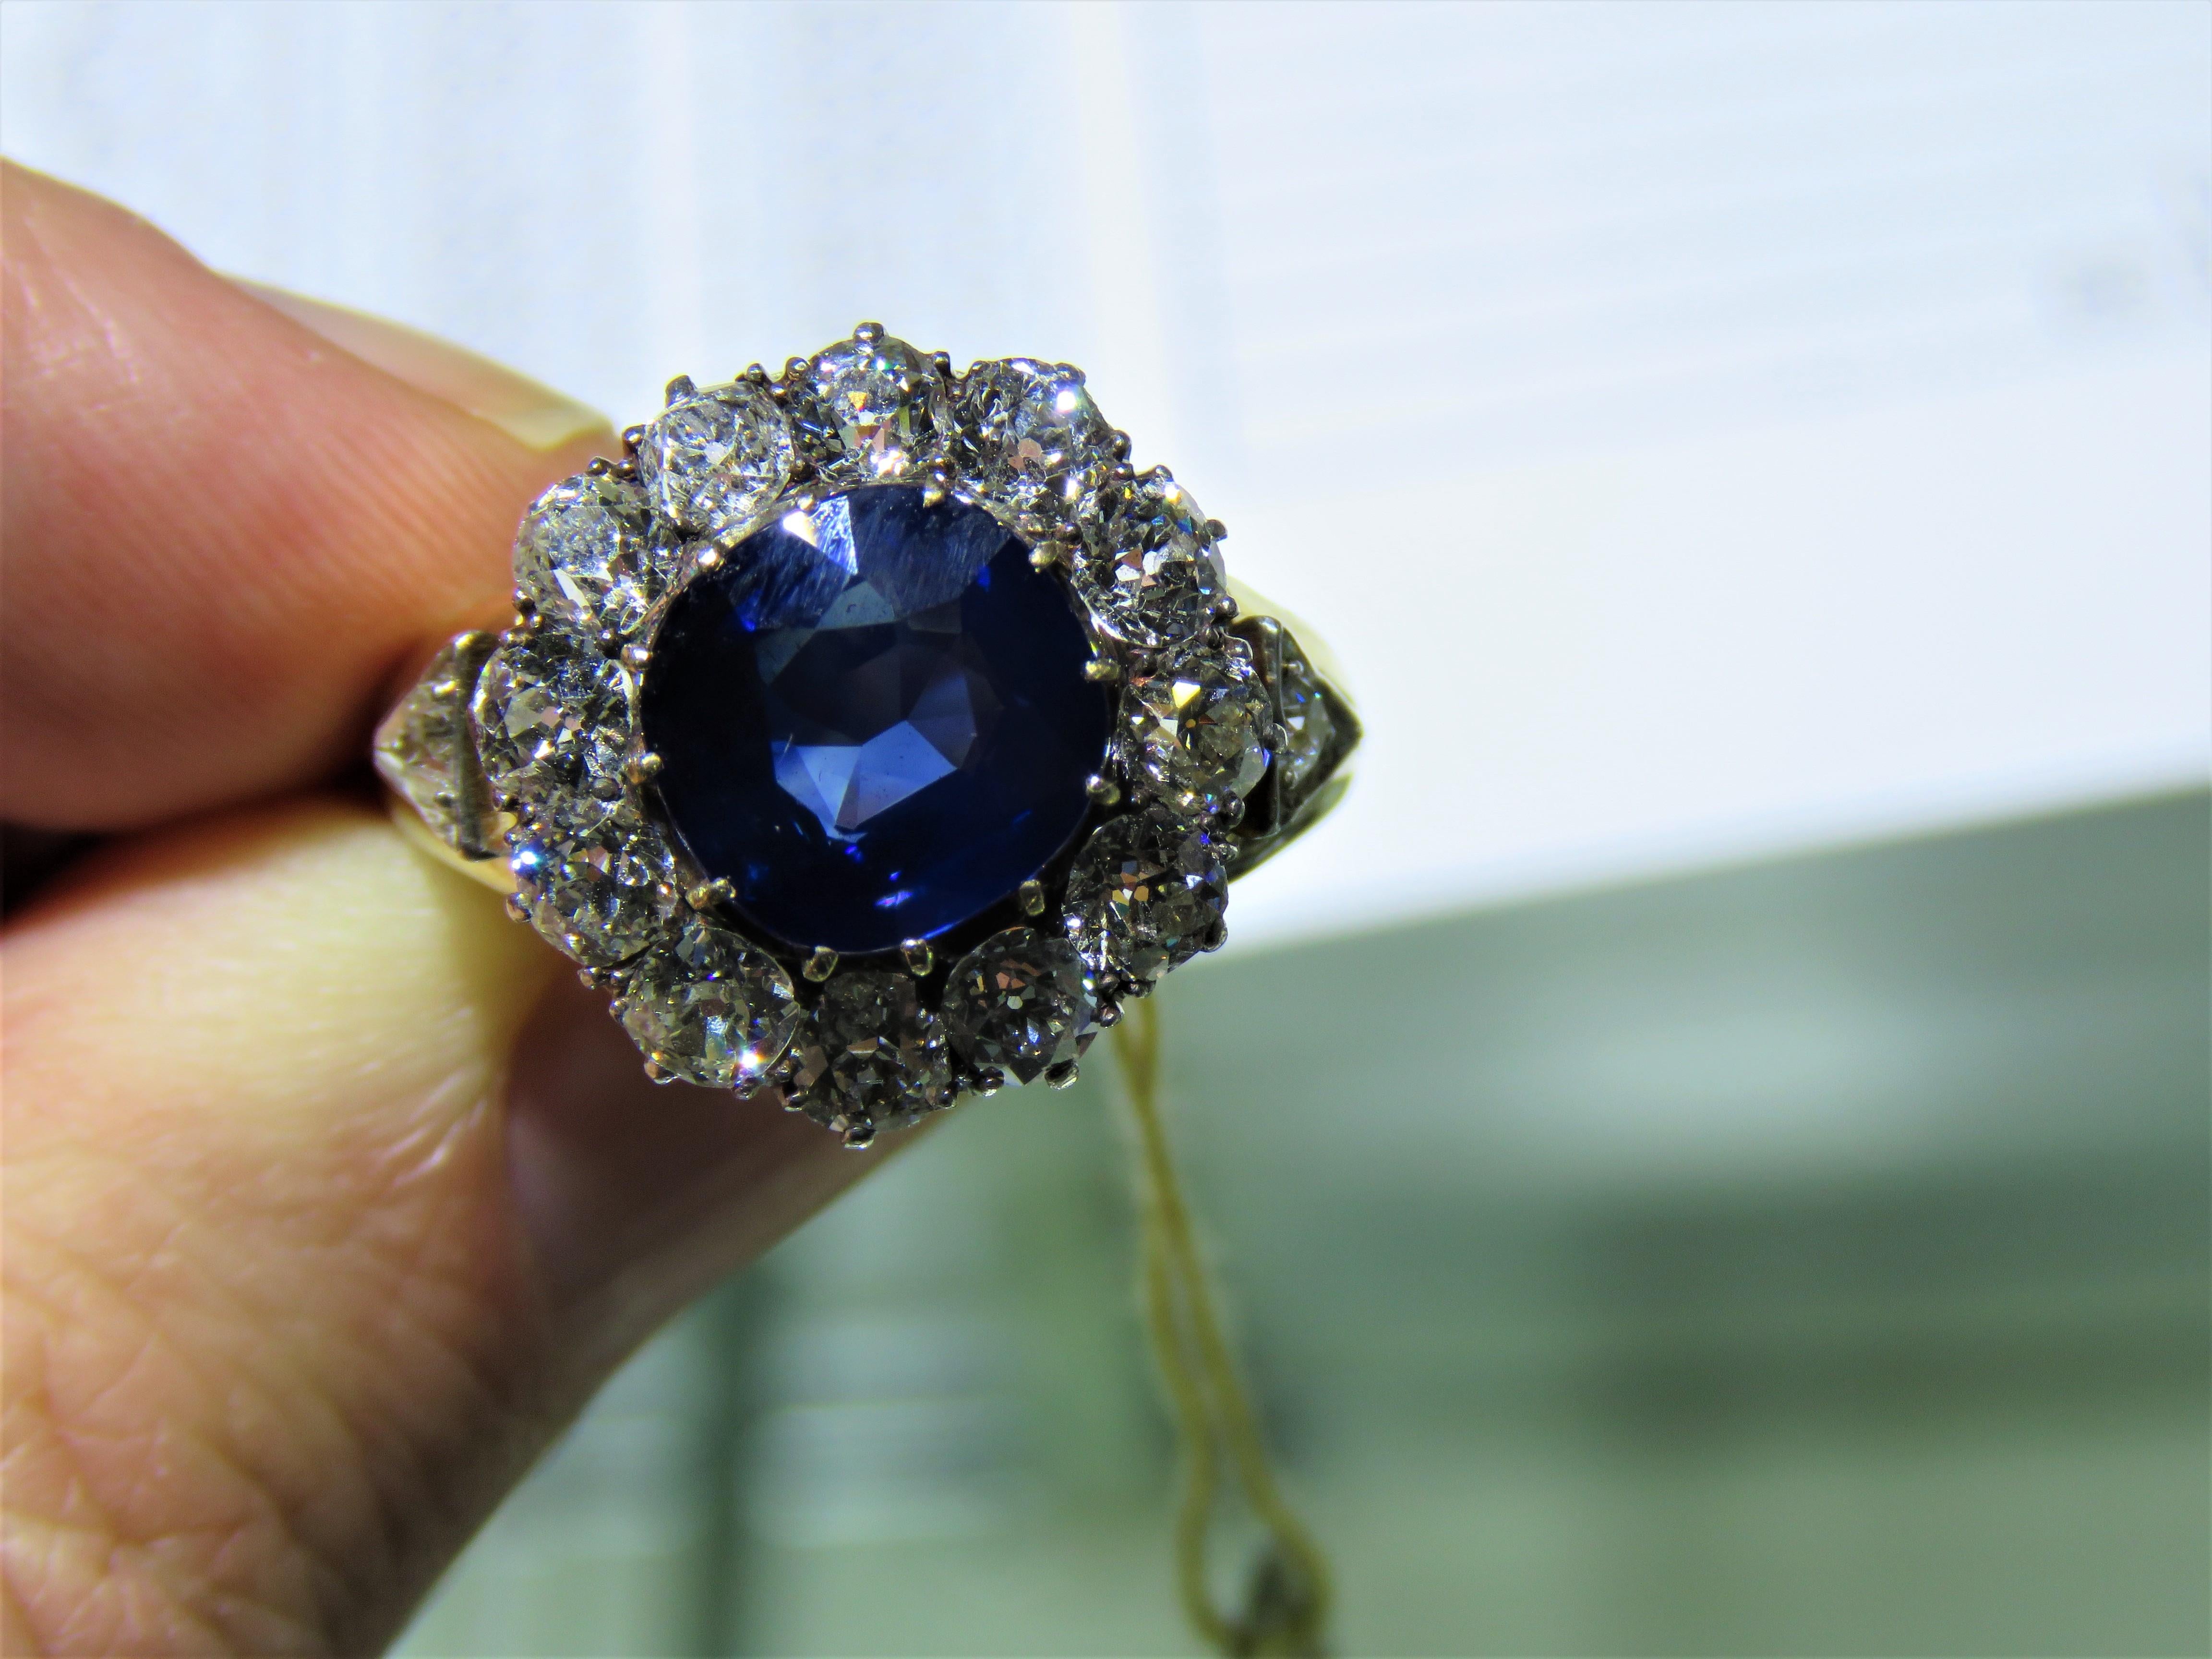 The Following Item we are offering is a Rare Important Radiant 18KT Yellow Gold Large Rare Fancy Blue Sapphire and Diamond Ring. Ring is comprised of a Rare Gorgeous Large Blue Sapphire surrounded by Magnificent Round Cut Diamonds and Trillion